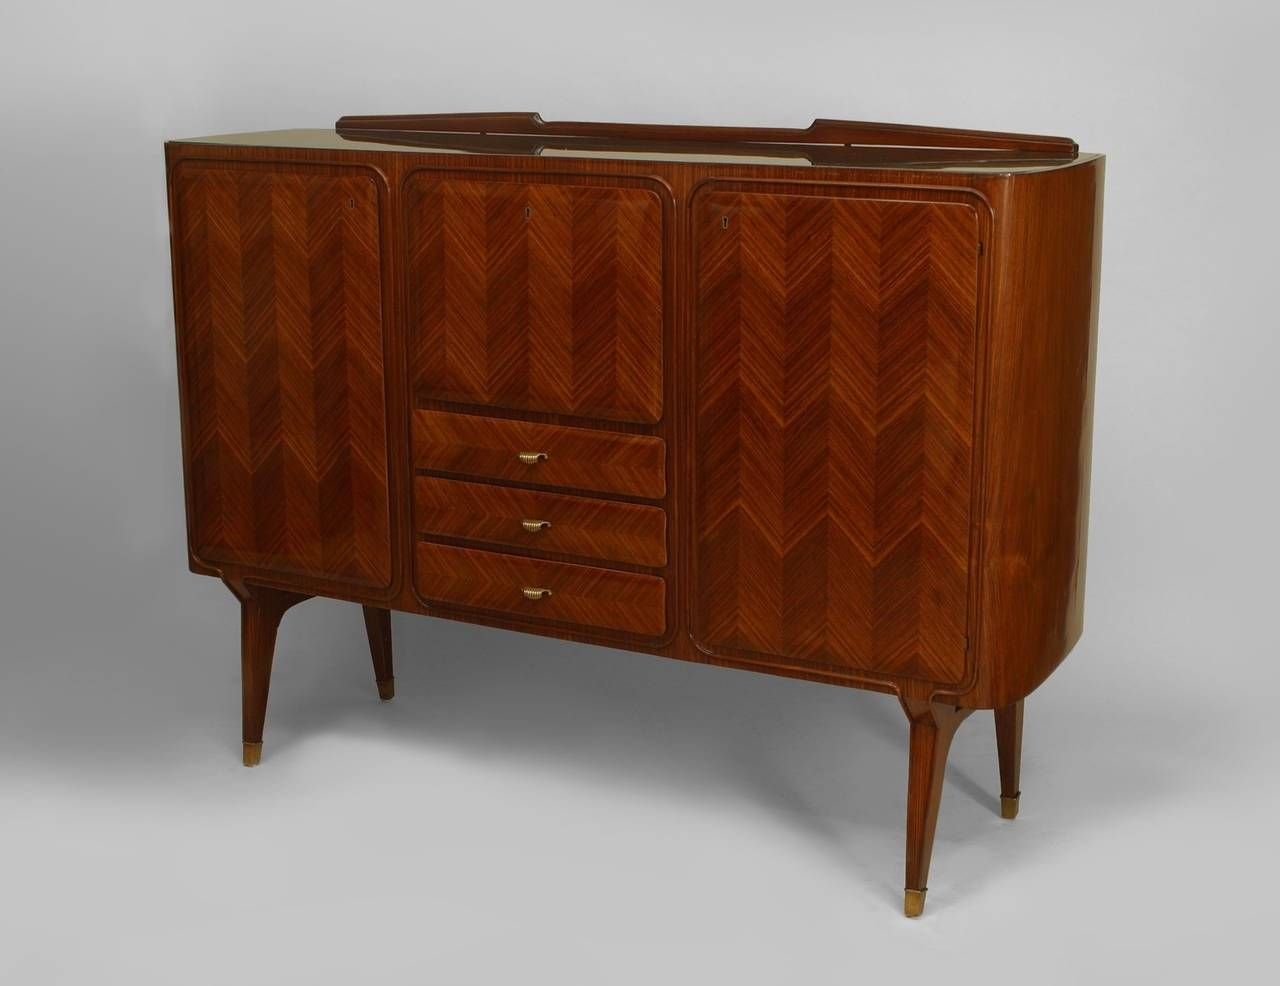 1950's Italian Dassi Herringbone Sideboard For Sale At 1stdibs Throughout Small Black Sideboard (View 15 of 20)